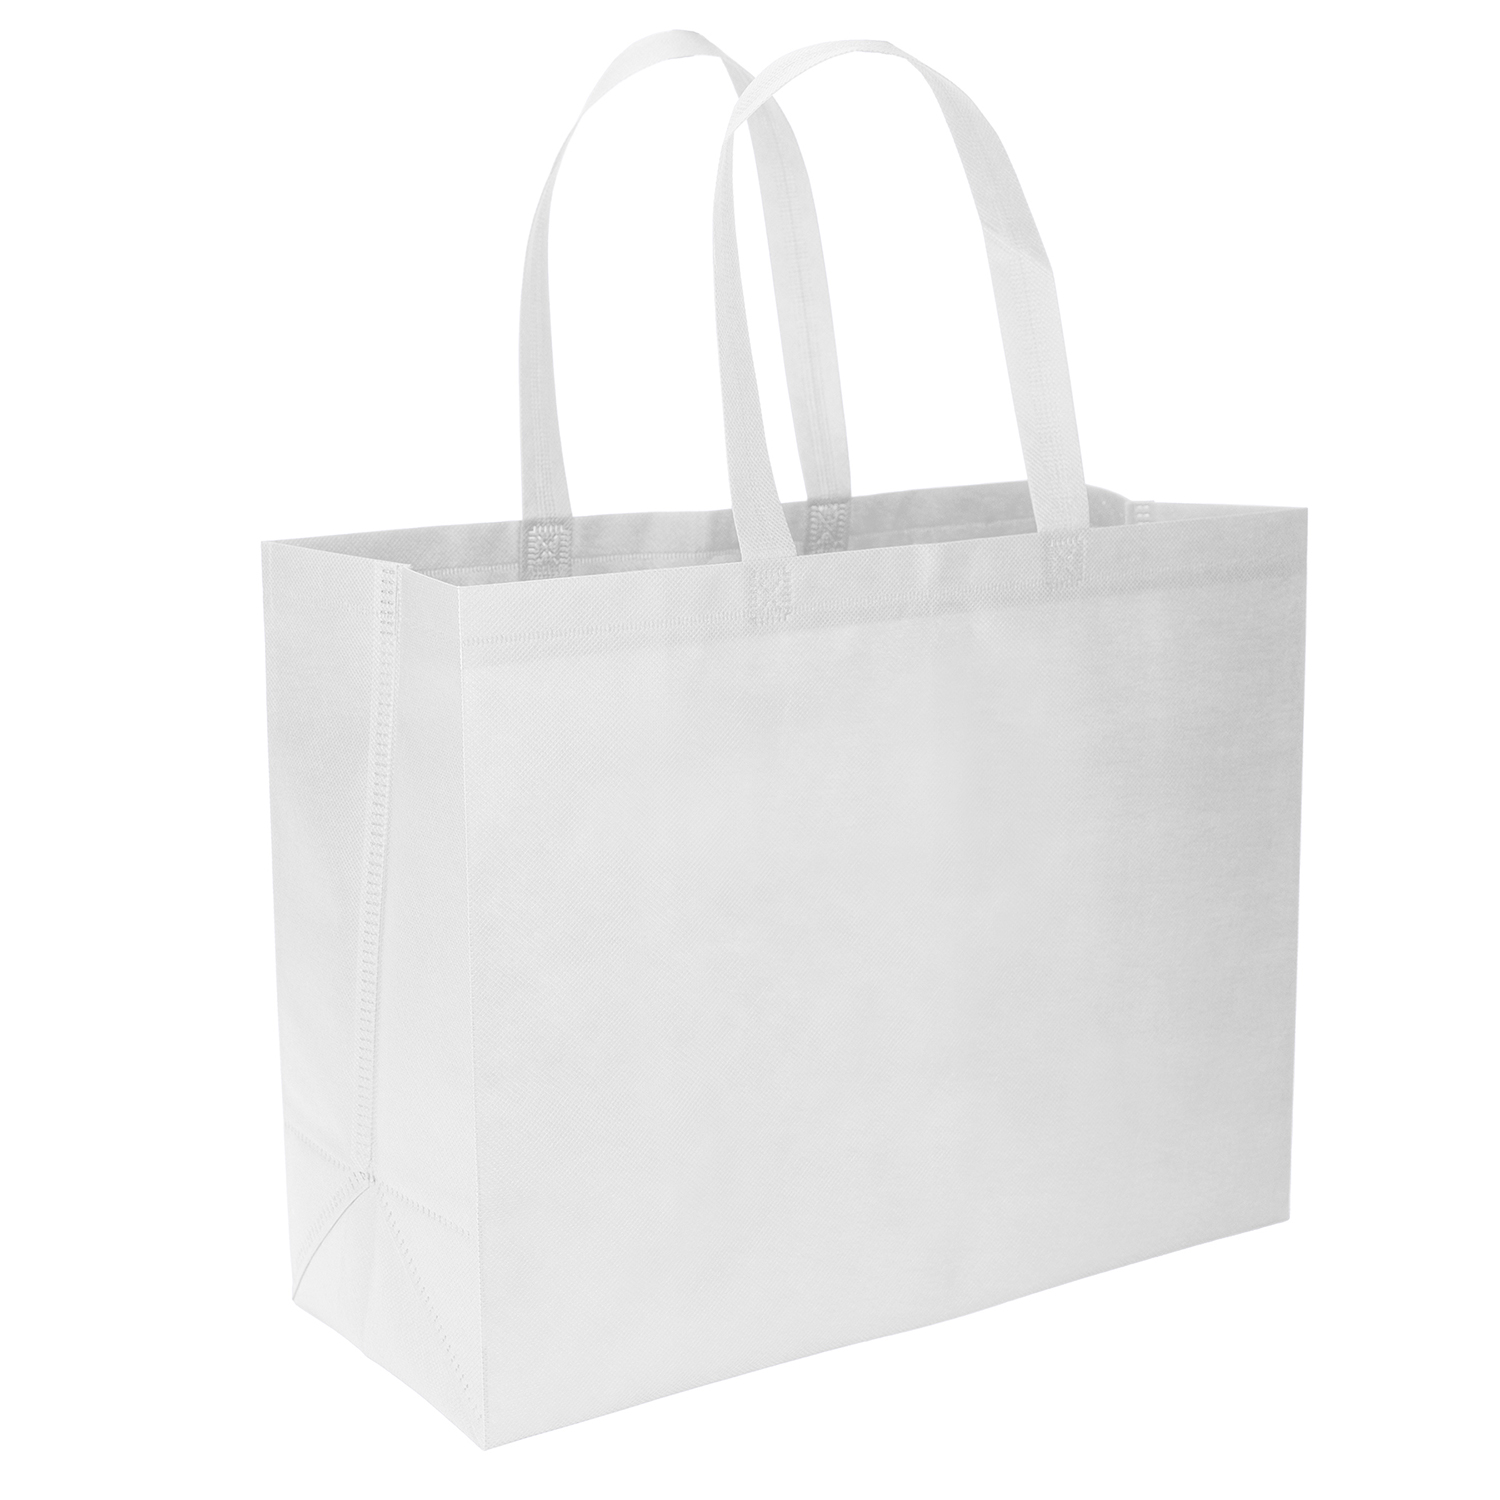 Bag Makers DYVA1915 - Custom Printed Promotional Non-Woven Value Budget Tote